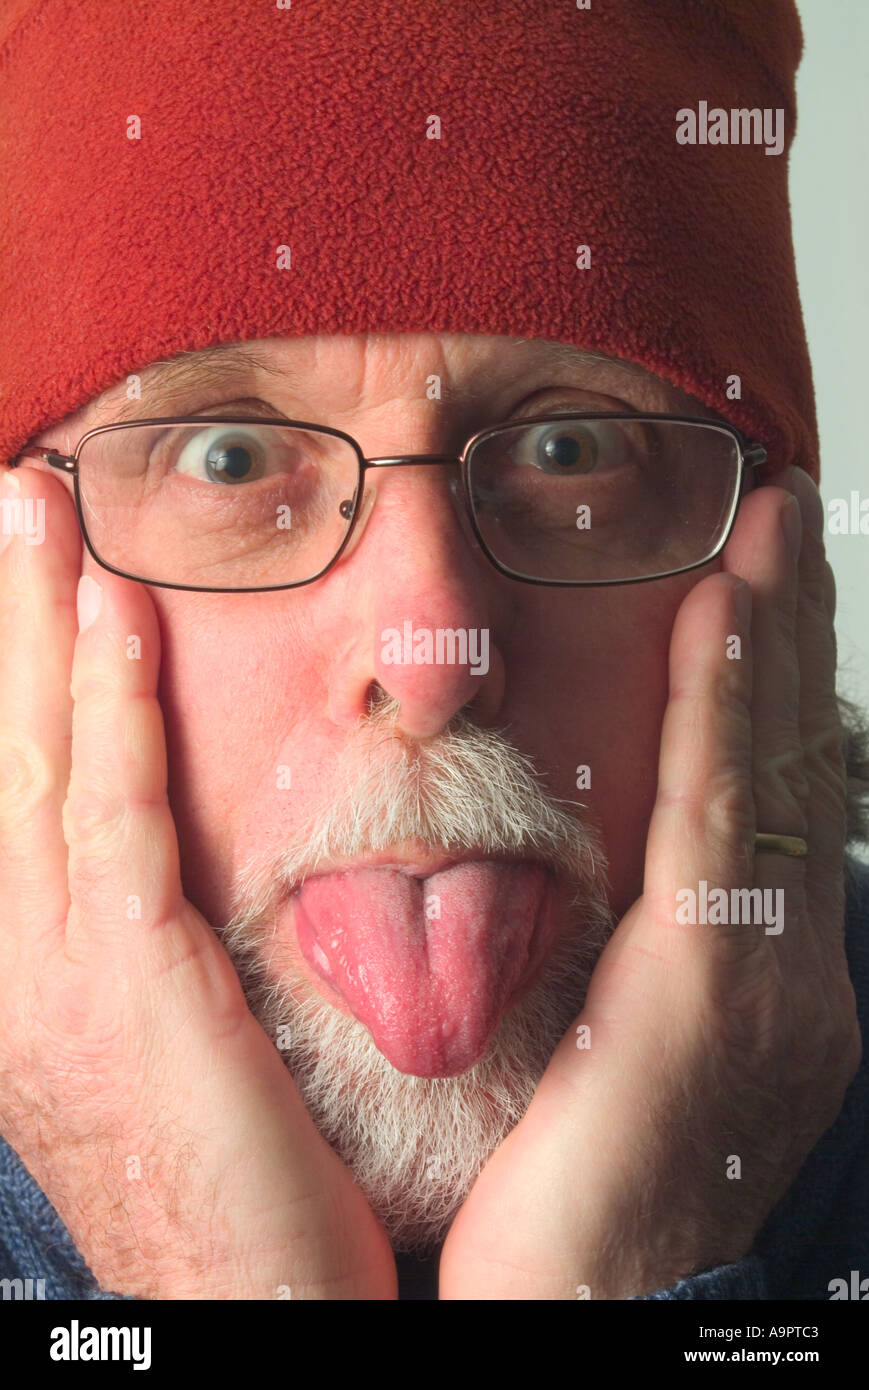 Elderly man in warm red hat with hands to face poking out tongue Stock Photo